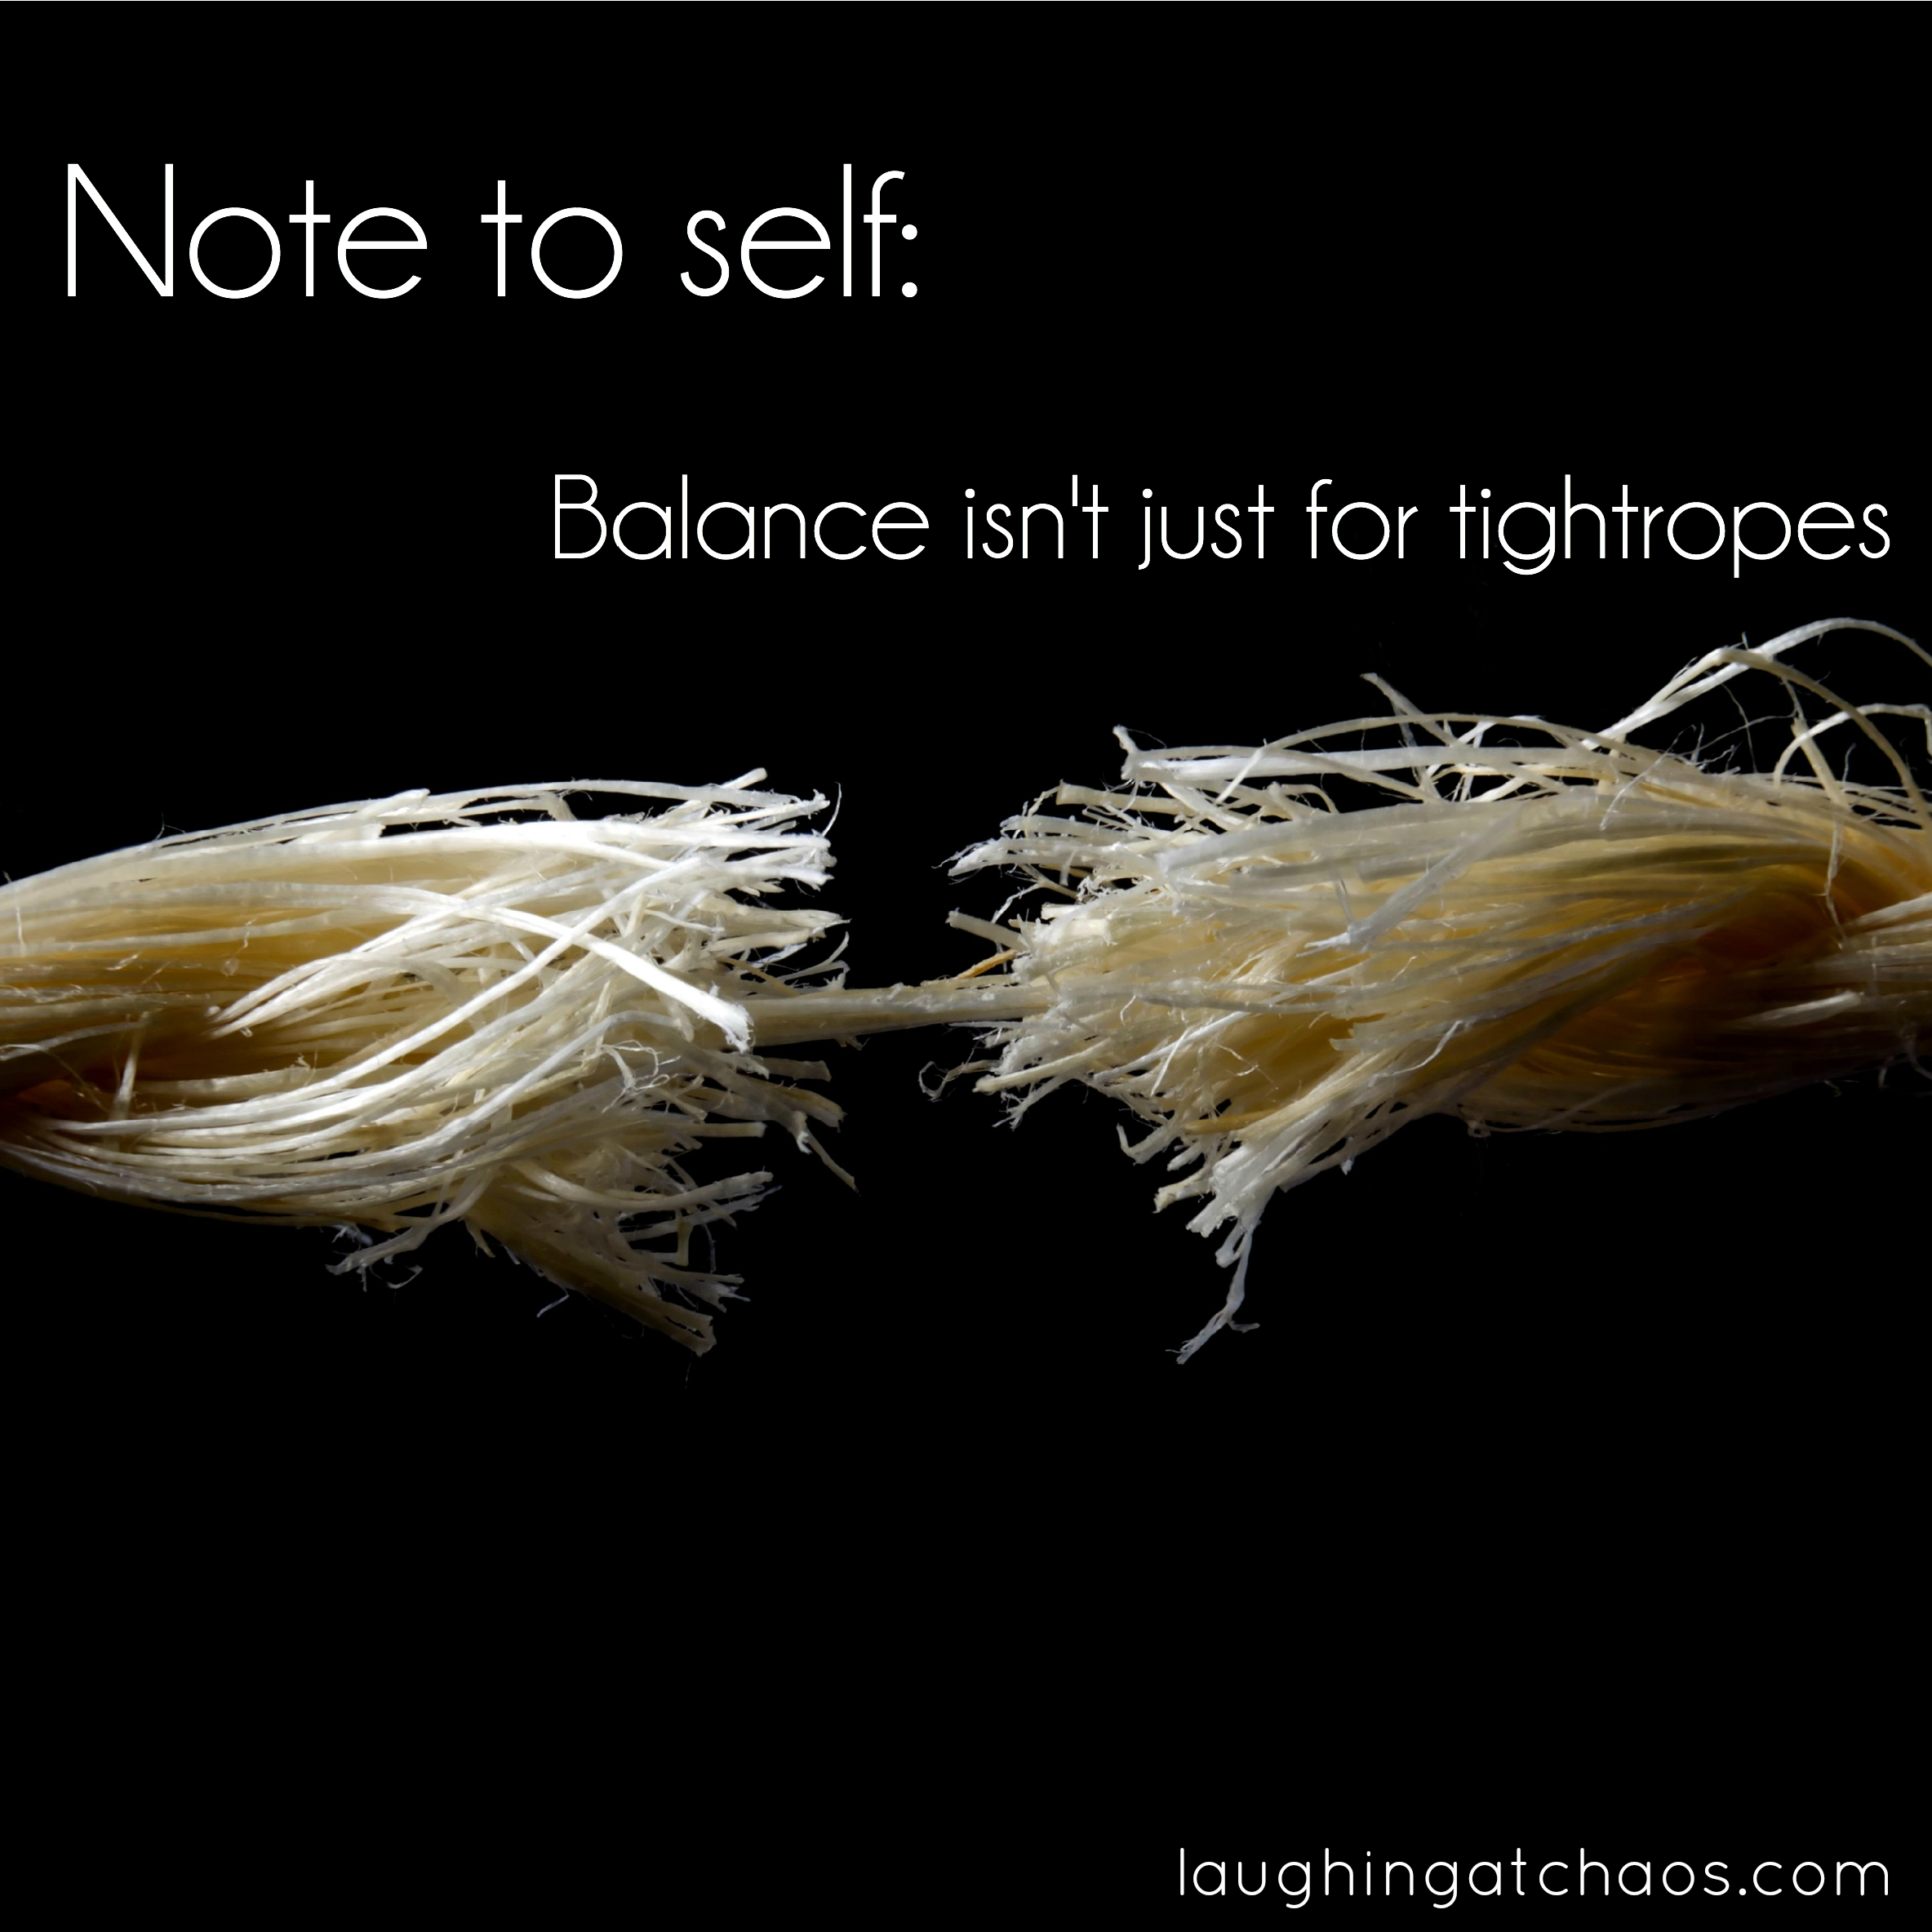 Note to self: Balance isn’t just for tightropes